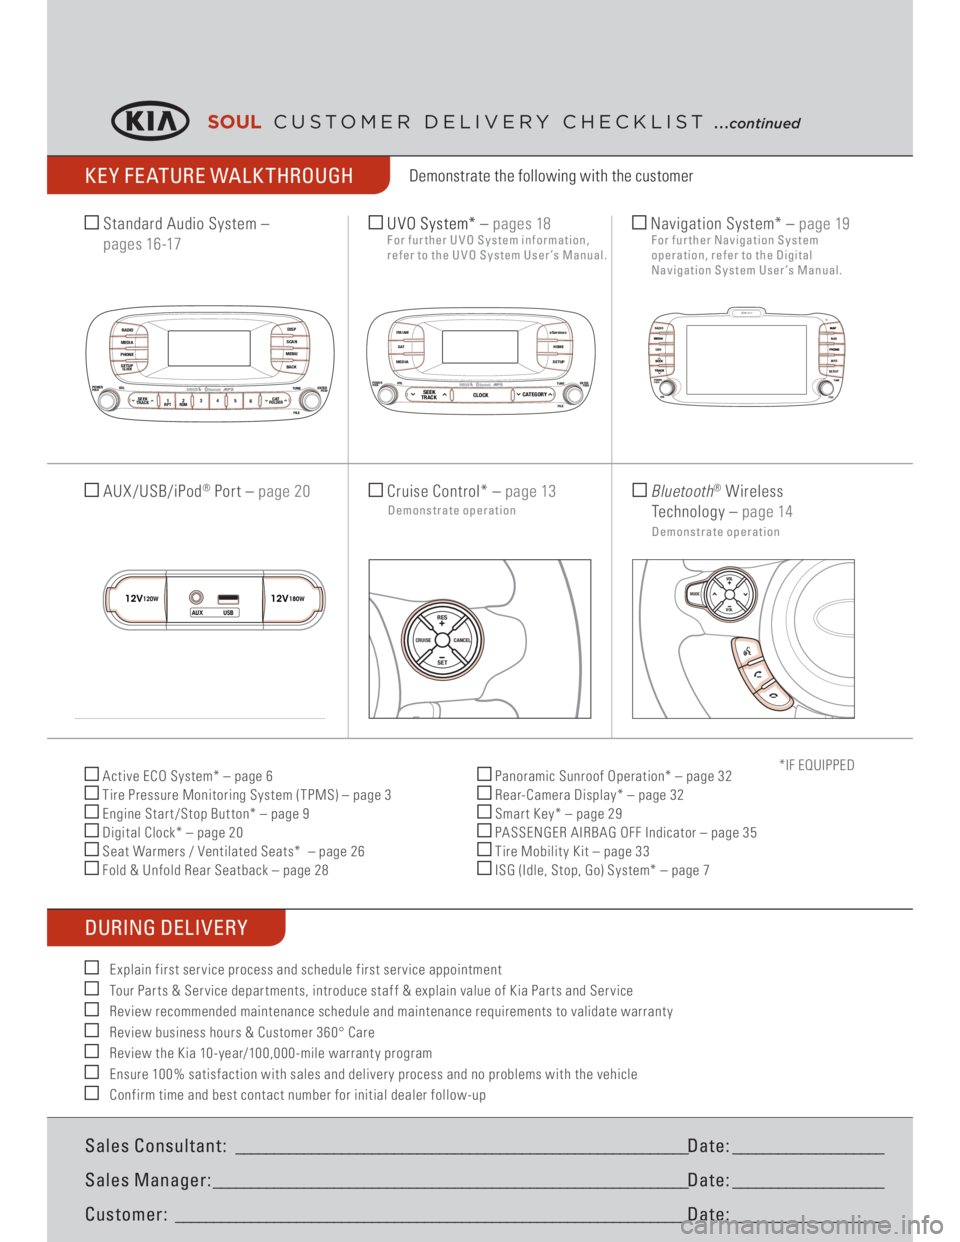 KIA SOUL 2014  Features and Functions Guide KE Y FE ATURE WALK THROUGH
DURING DELIVERY 
 Active ECO System* – page 6
 Tire Pressure Monitoring System (TPMS) – page 3
 Engine Star t/Stop But ton* – page 9
 Digital Clock* – page 20
 Seat 